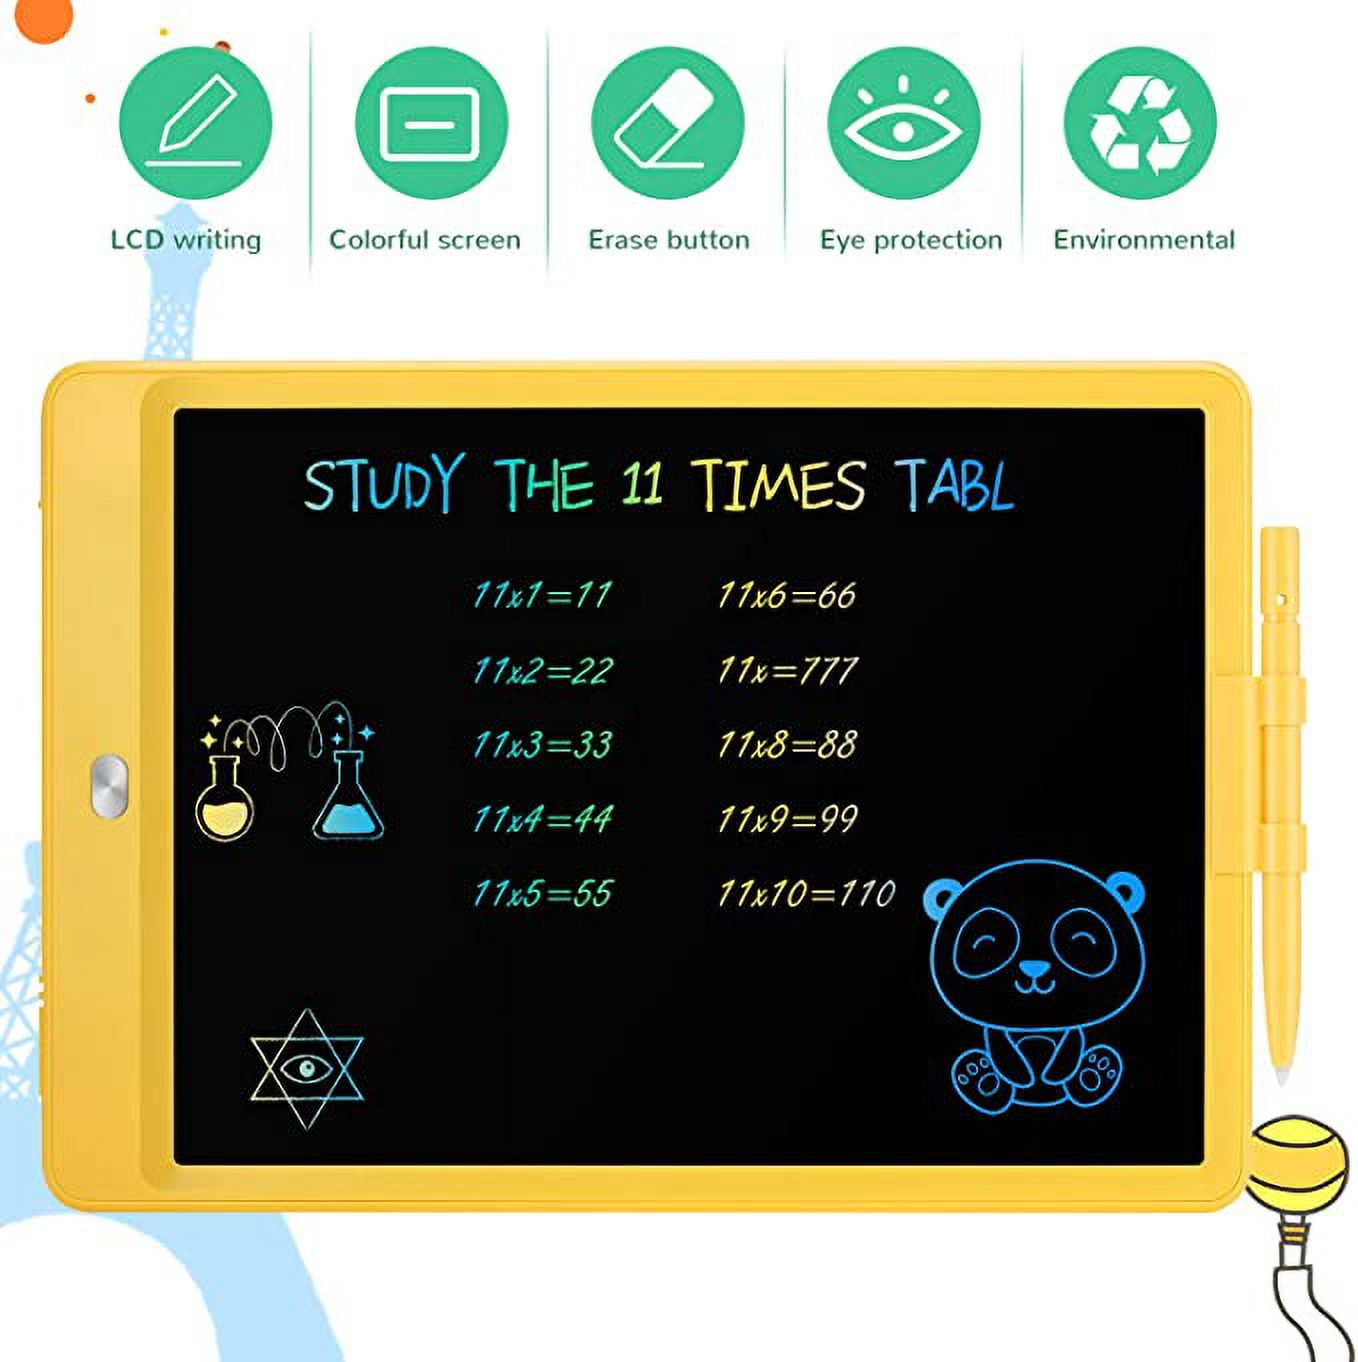 Electronic LCD Drawing Tablet Doodle Board,10.5 inch Colorful Drawing and Writing Pad,Travel Gifts for Kids Ages 3 4 5 6 7 8 Year Old Girls Boys